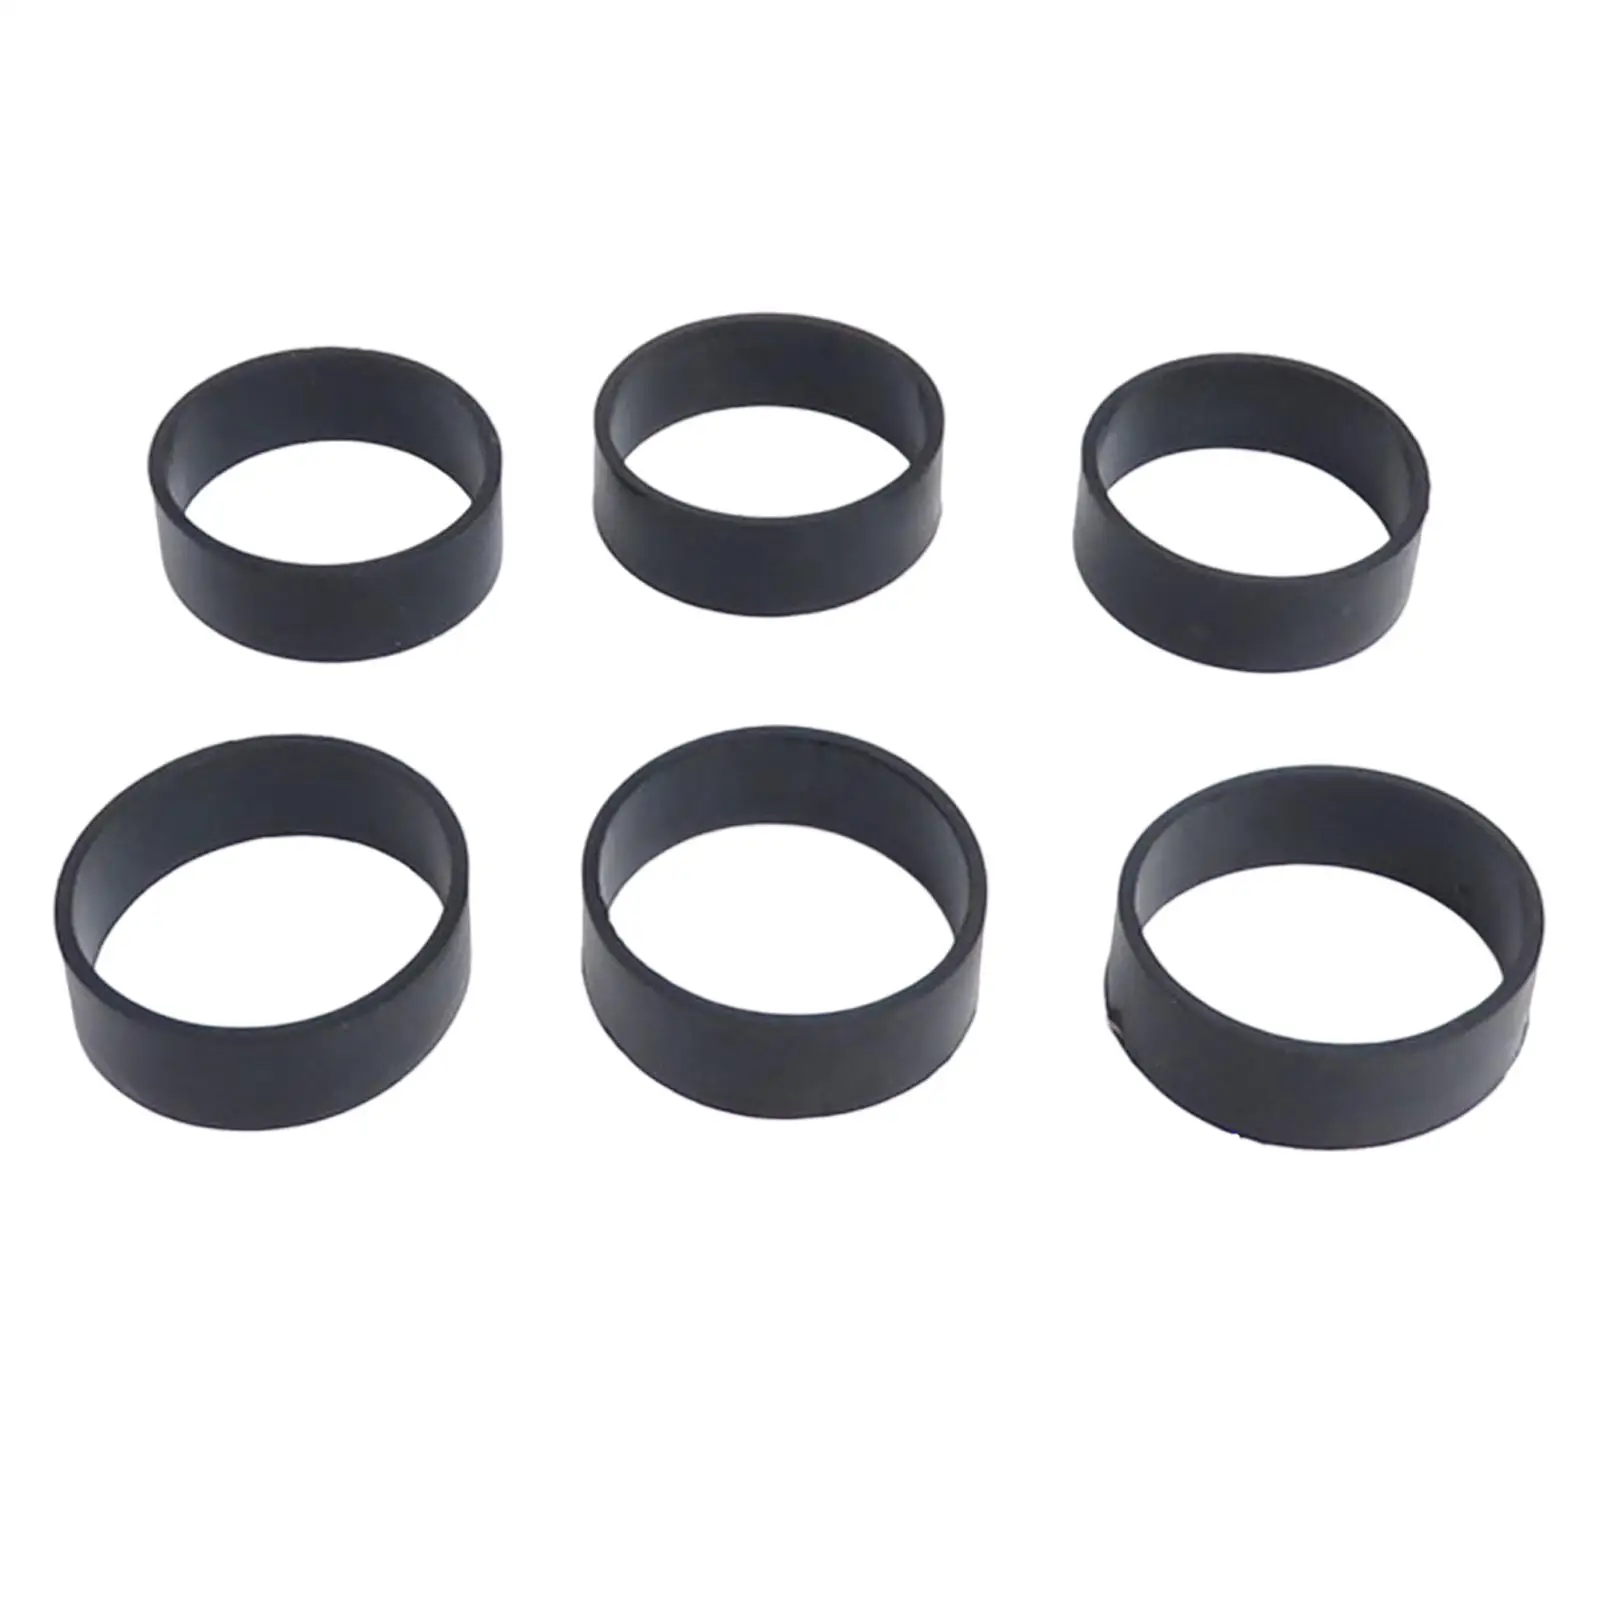 6Pcs Rubber Fixed Rings for Scuba Diving Webbing Dive Weight Belt Underwater Tank Backplate Strap Outdoor Backpack Harness